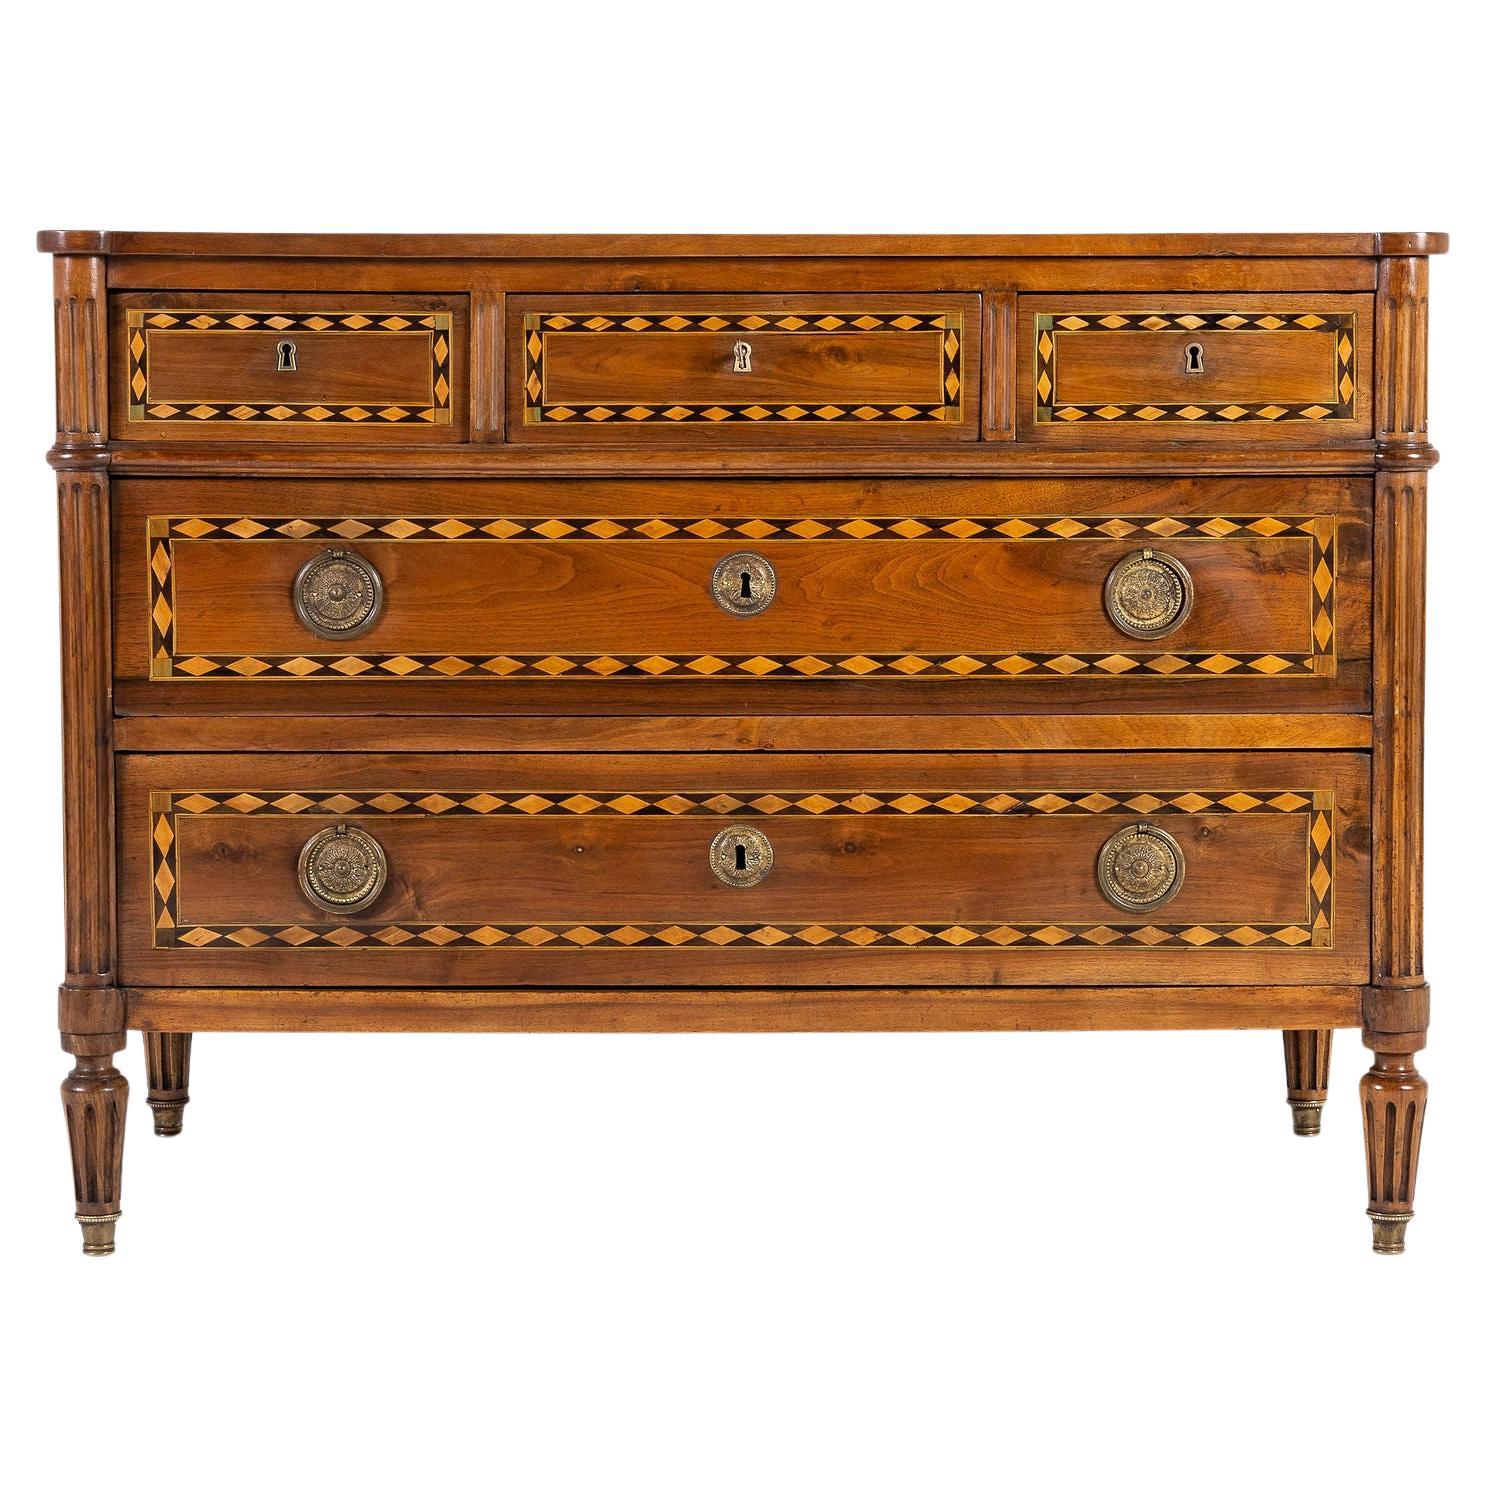 Late 18th Century French Inlaid Walnut Commode For Sale